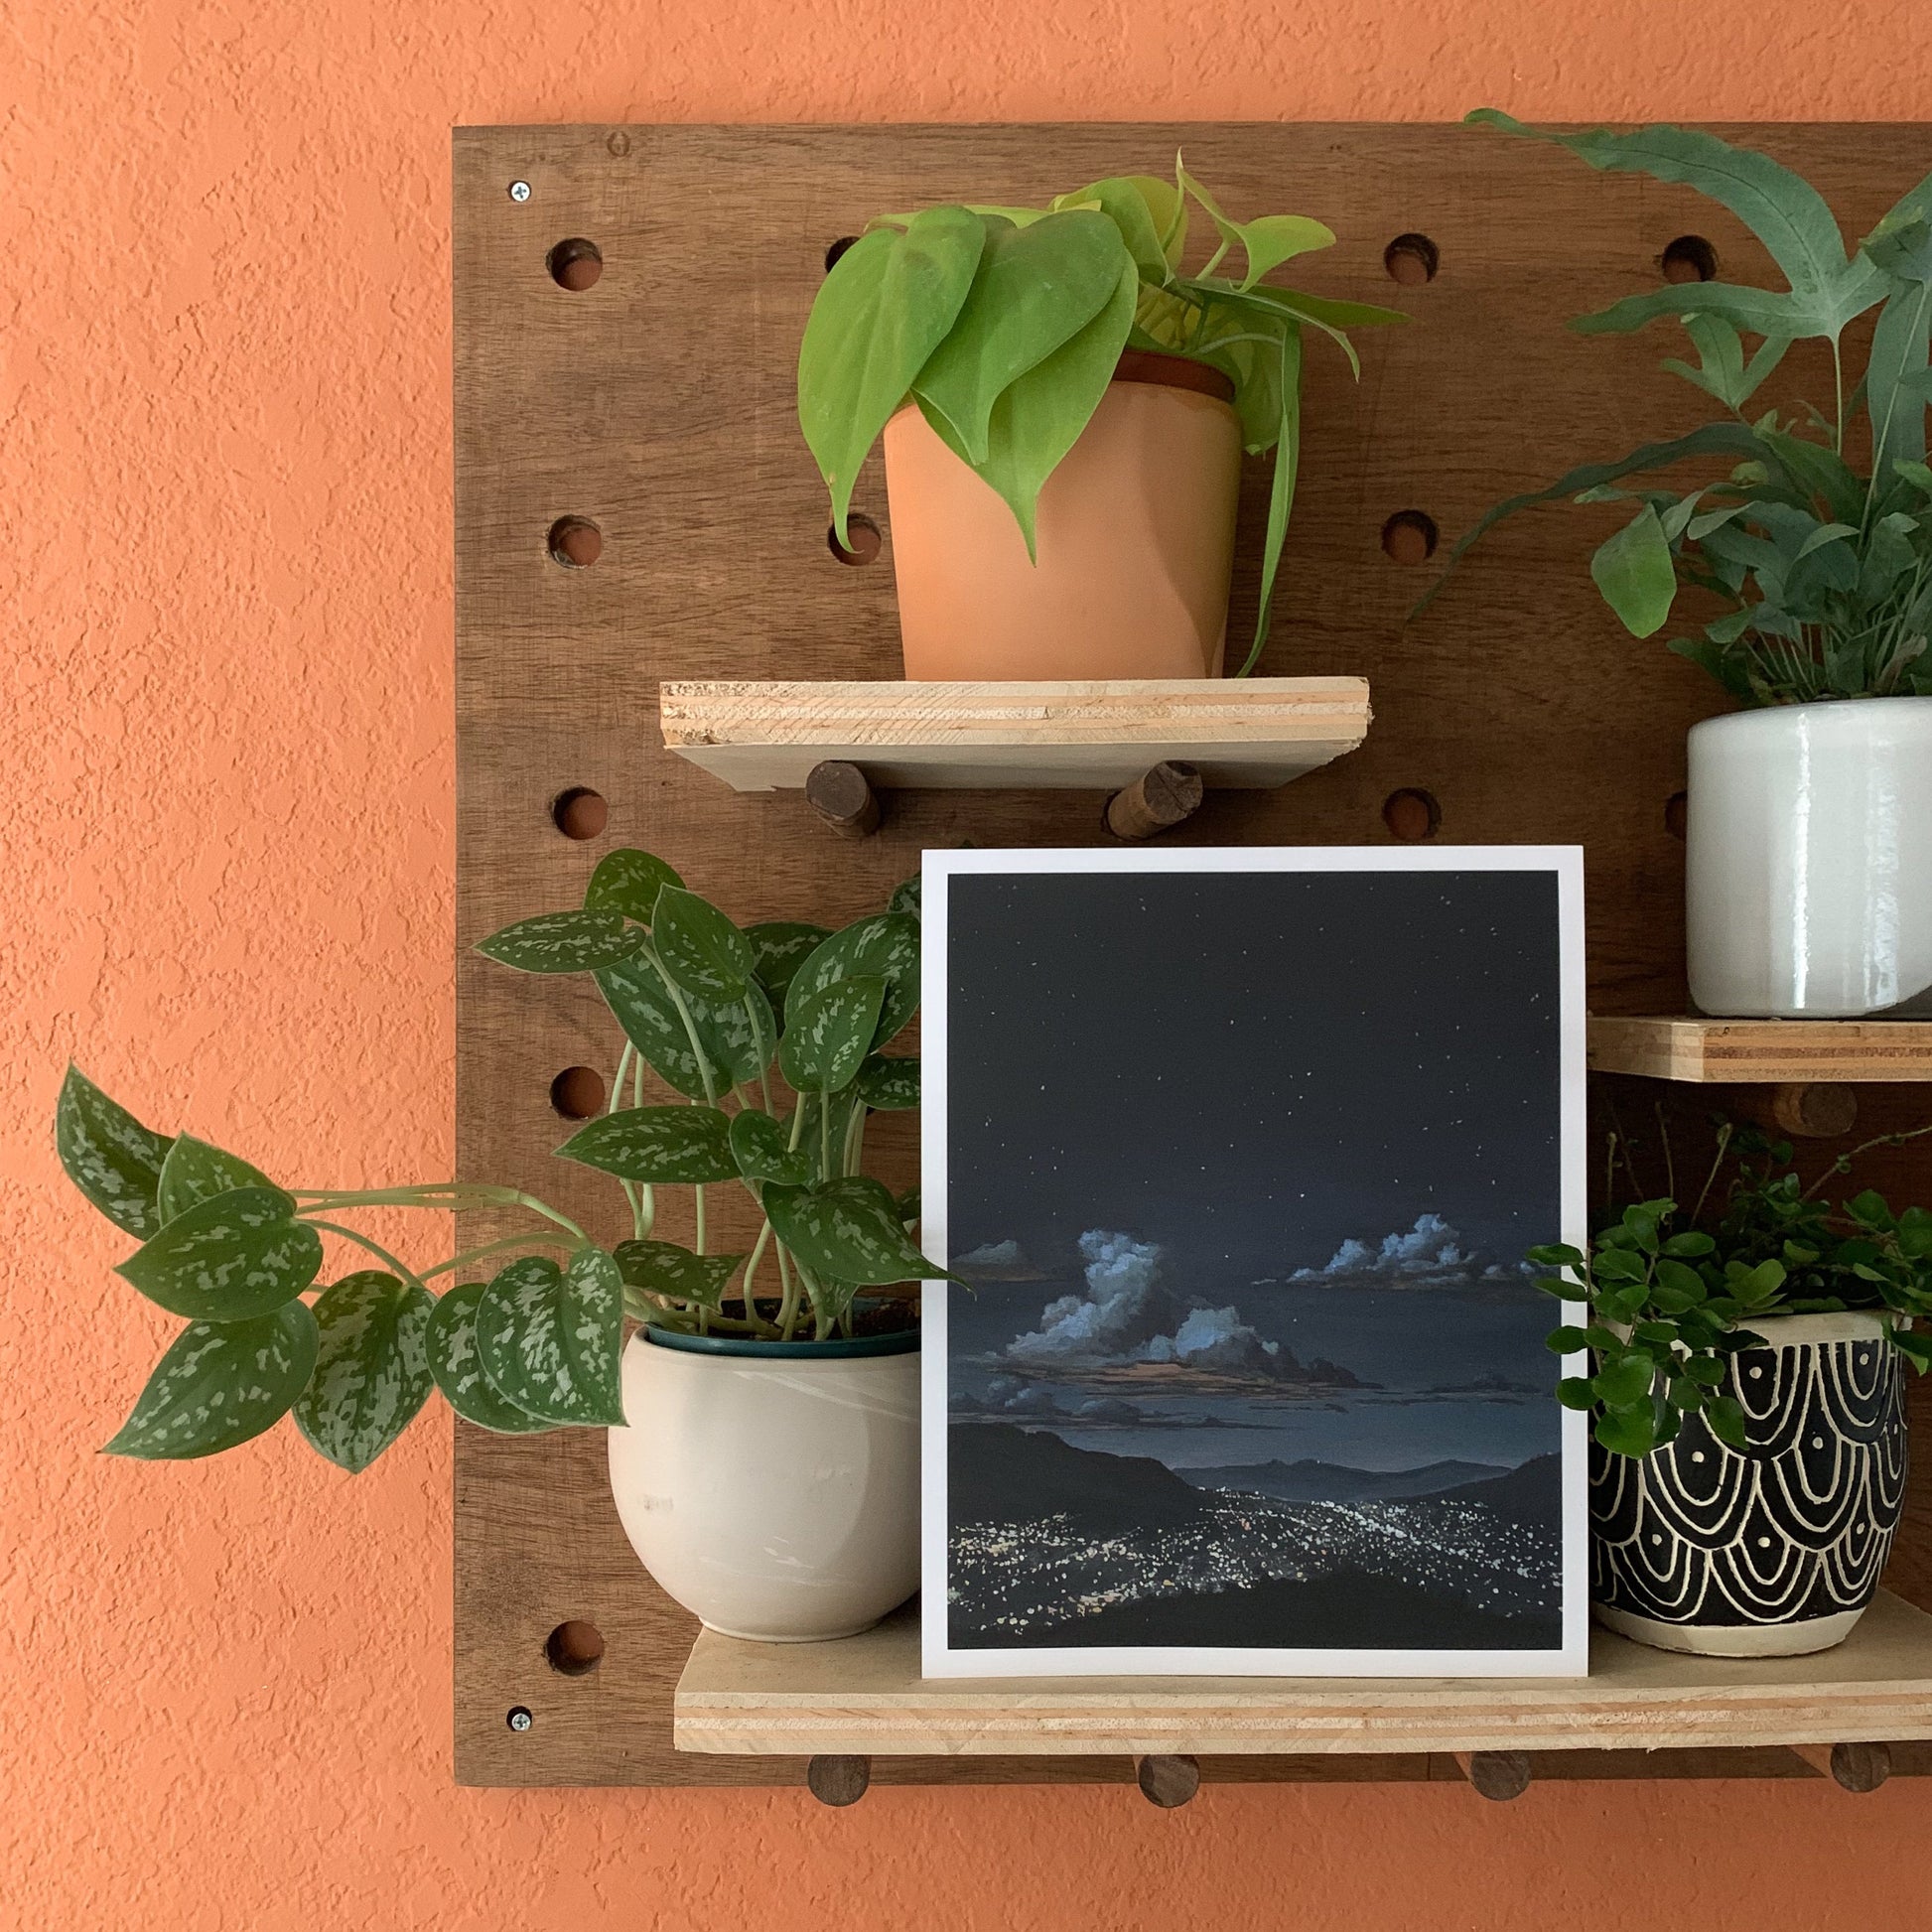 "La Canada Night Lights" Wall Art by Josue Salazar on a peg board surrounded by plants